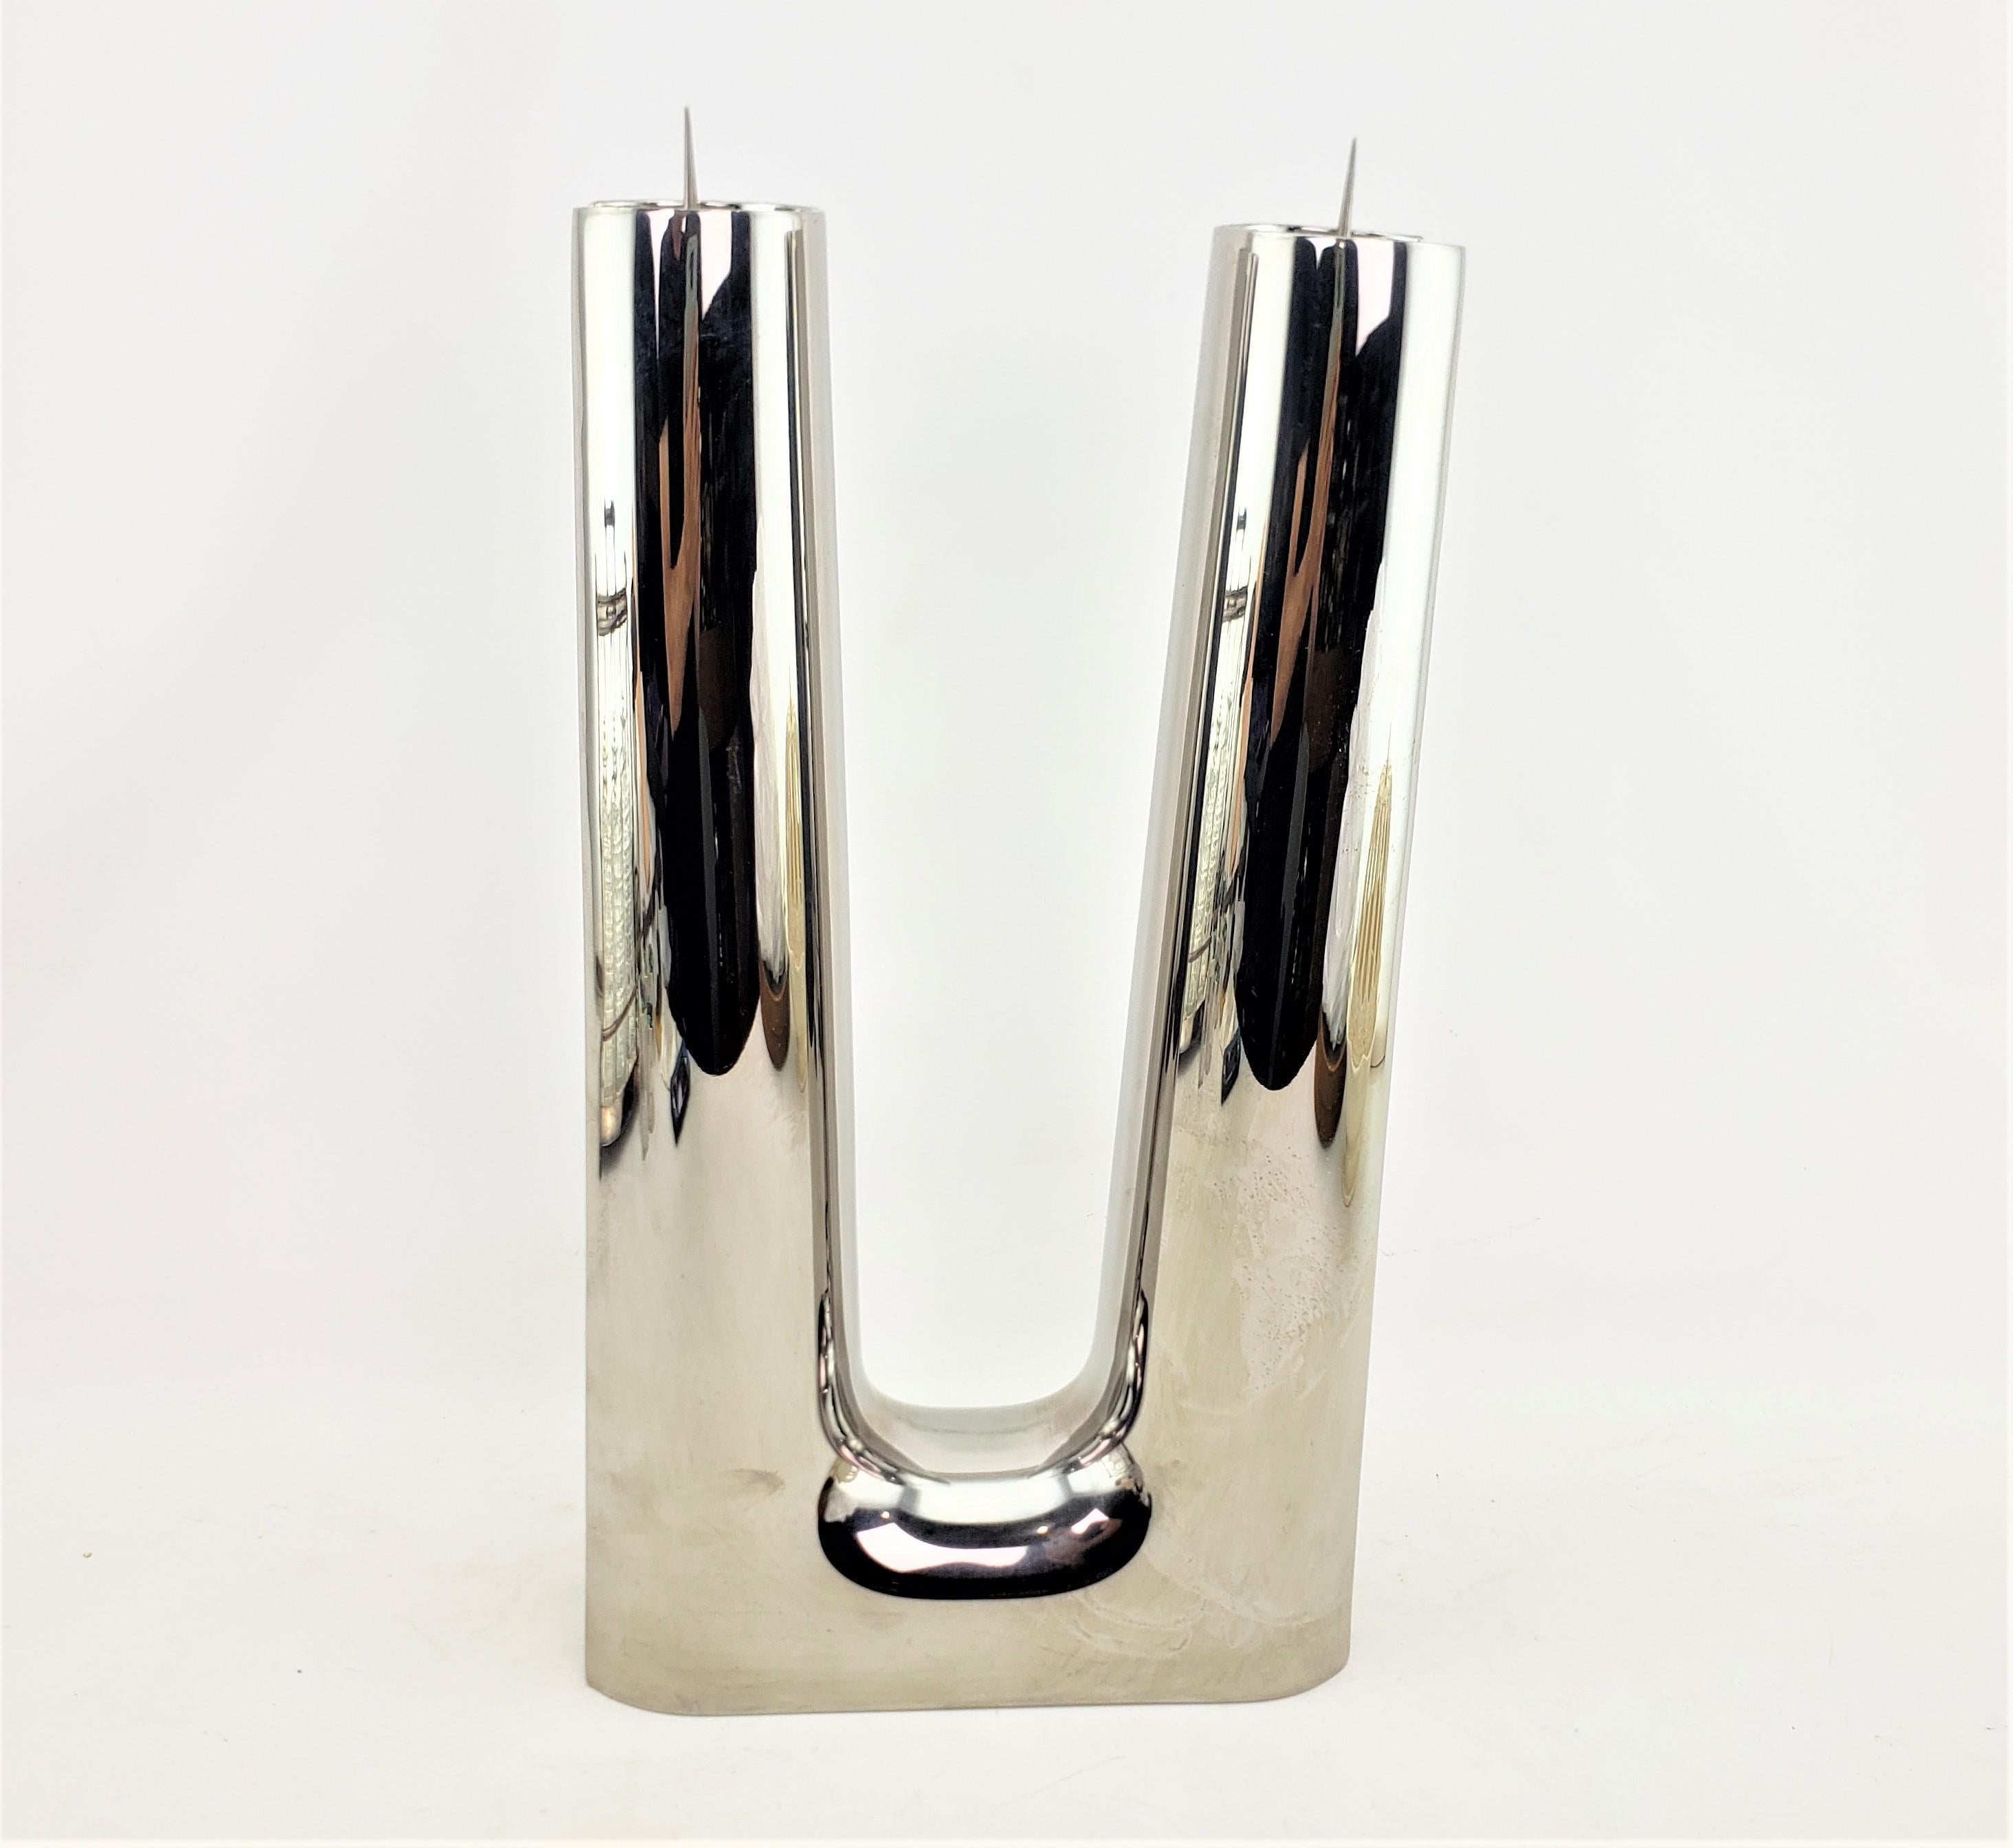 Mid-Century Modern Contemporary Georg Jensen Polished Stainless Steel Candle Holder or Candelabra For Sale